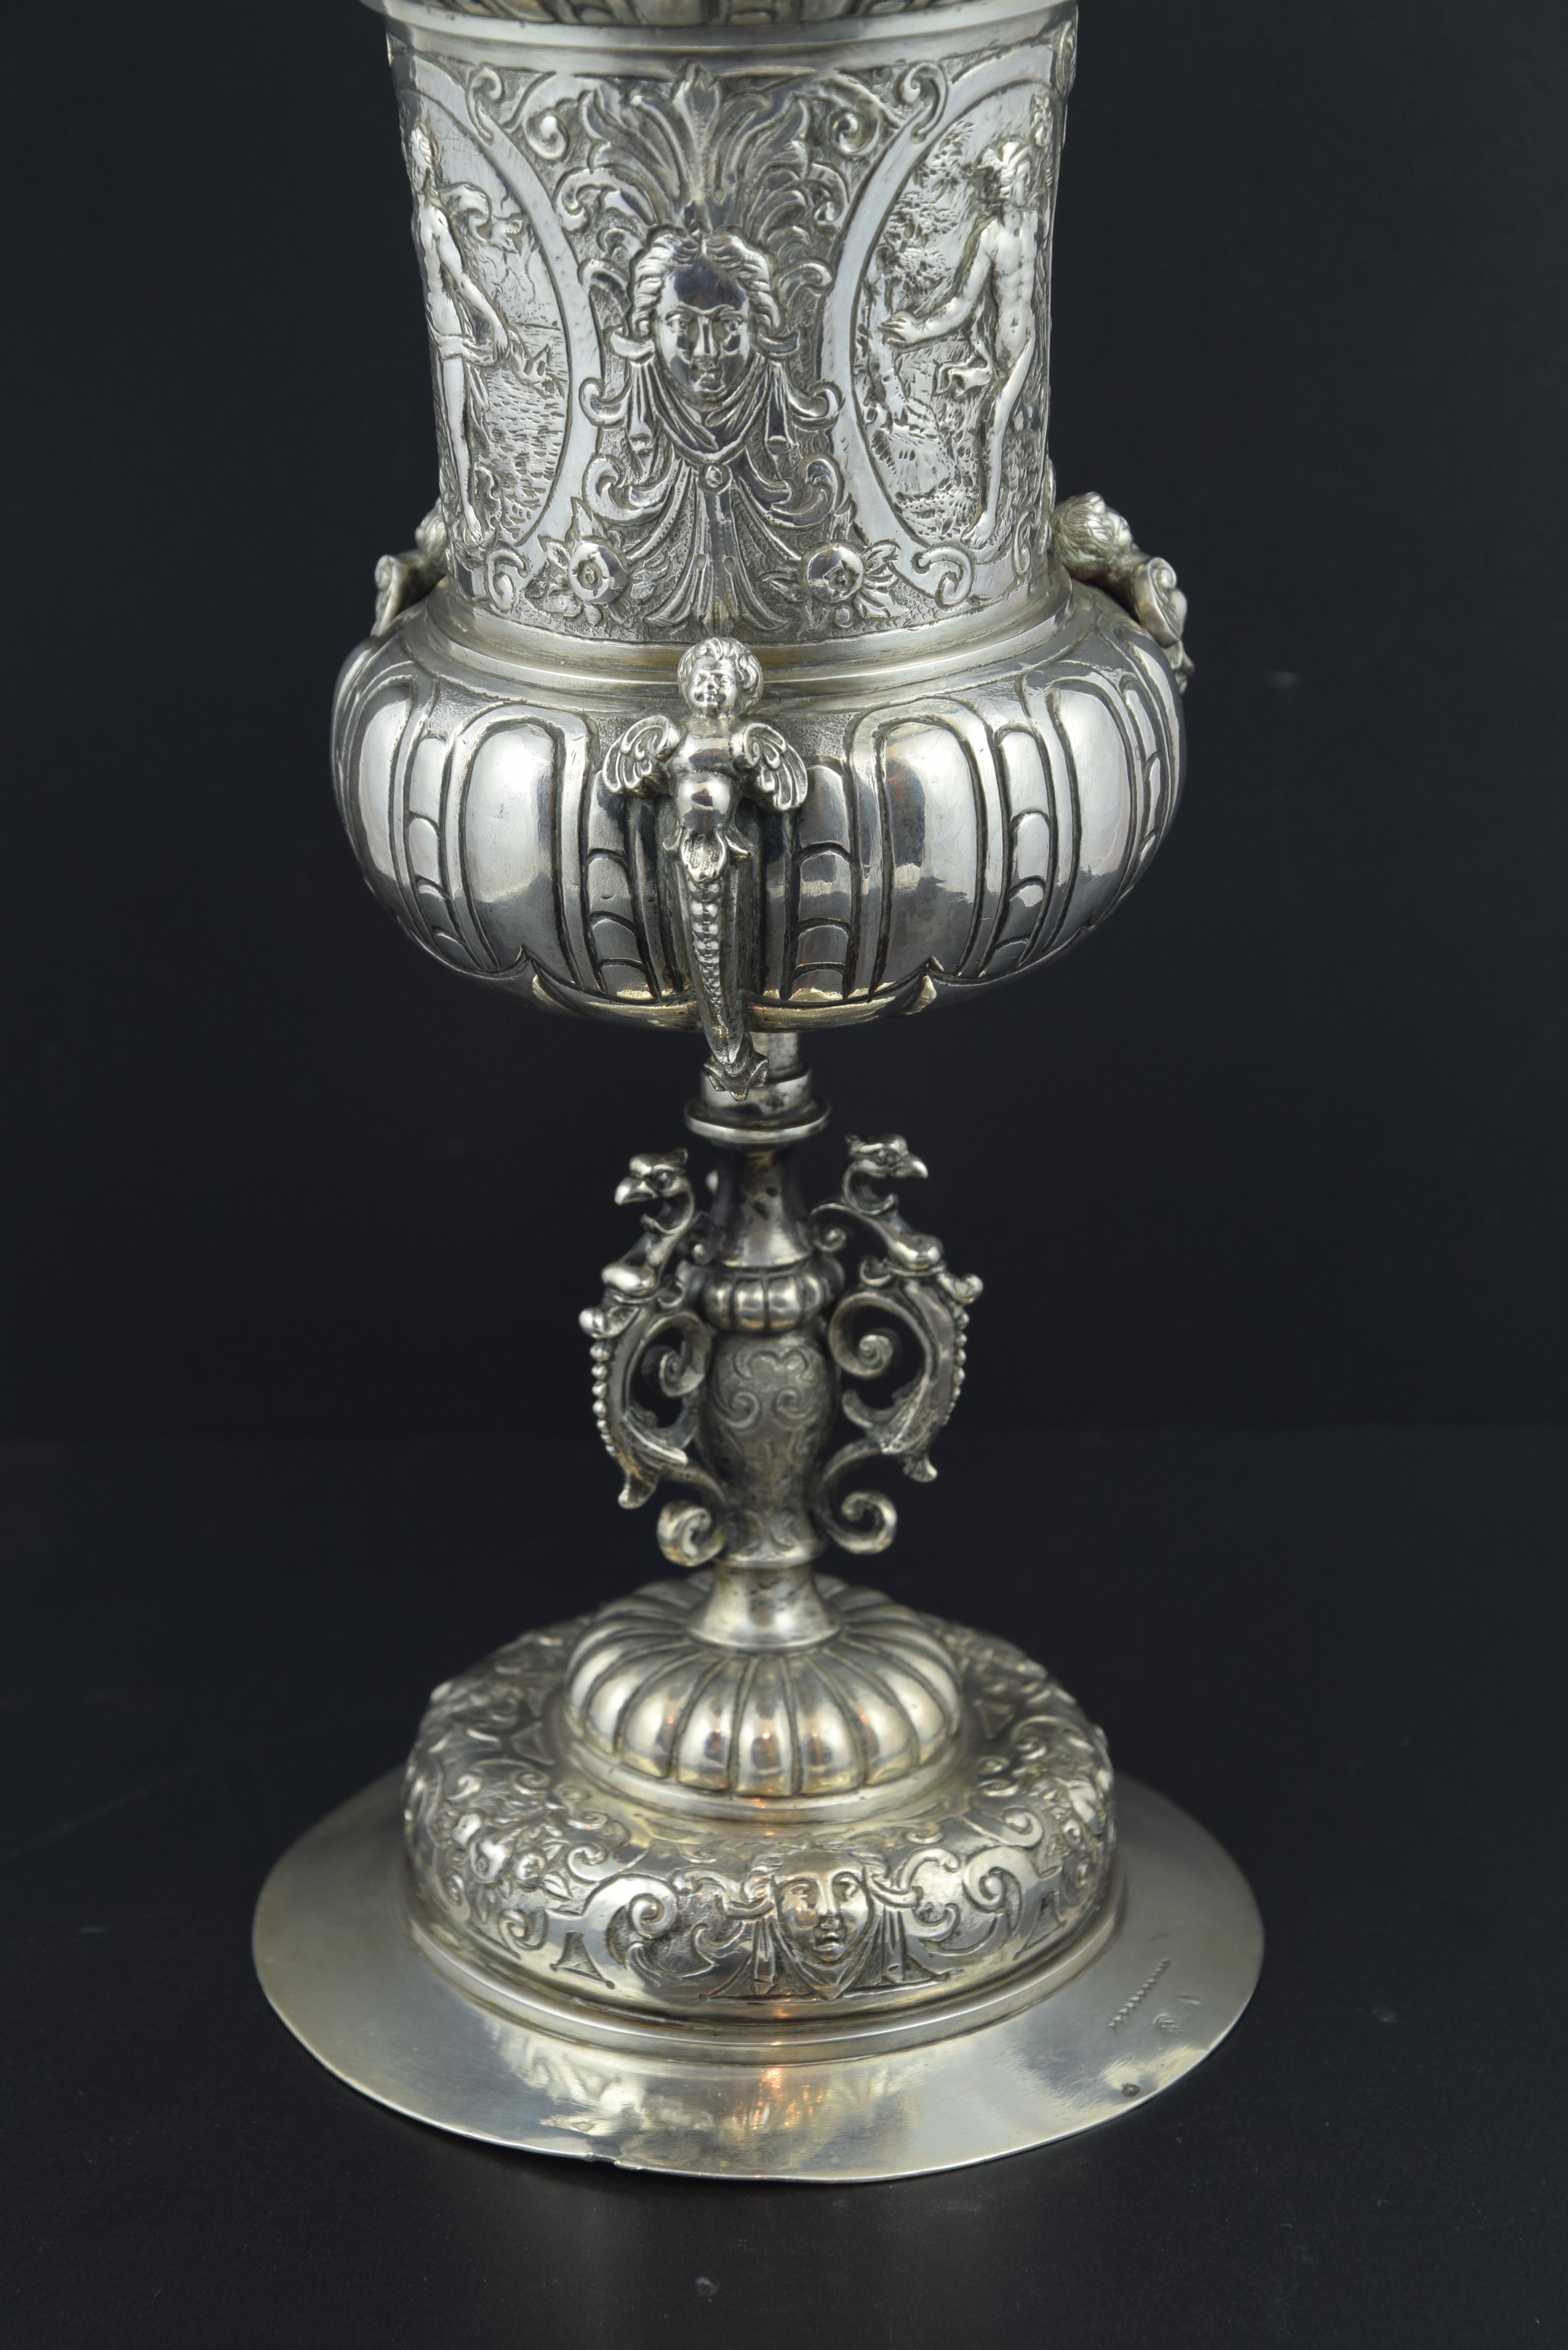 Renaissance Revival Silver Pokal 'Cup', Germany, Possibly 19th Century 'after 17th Century Models'